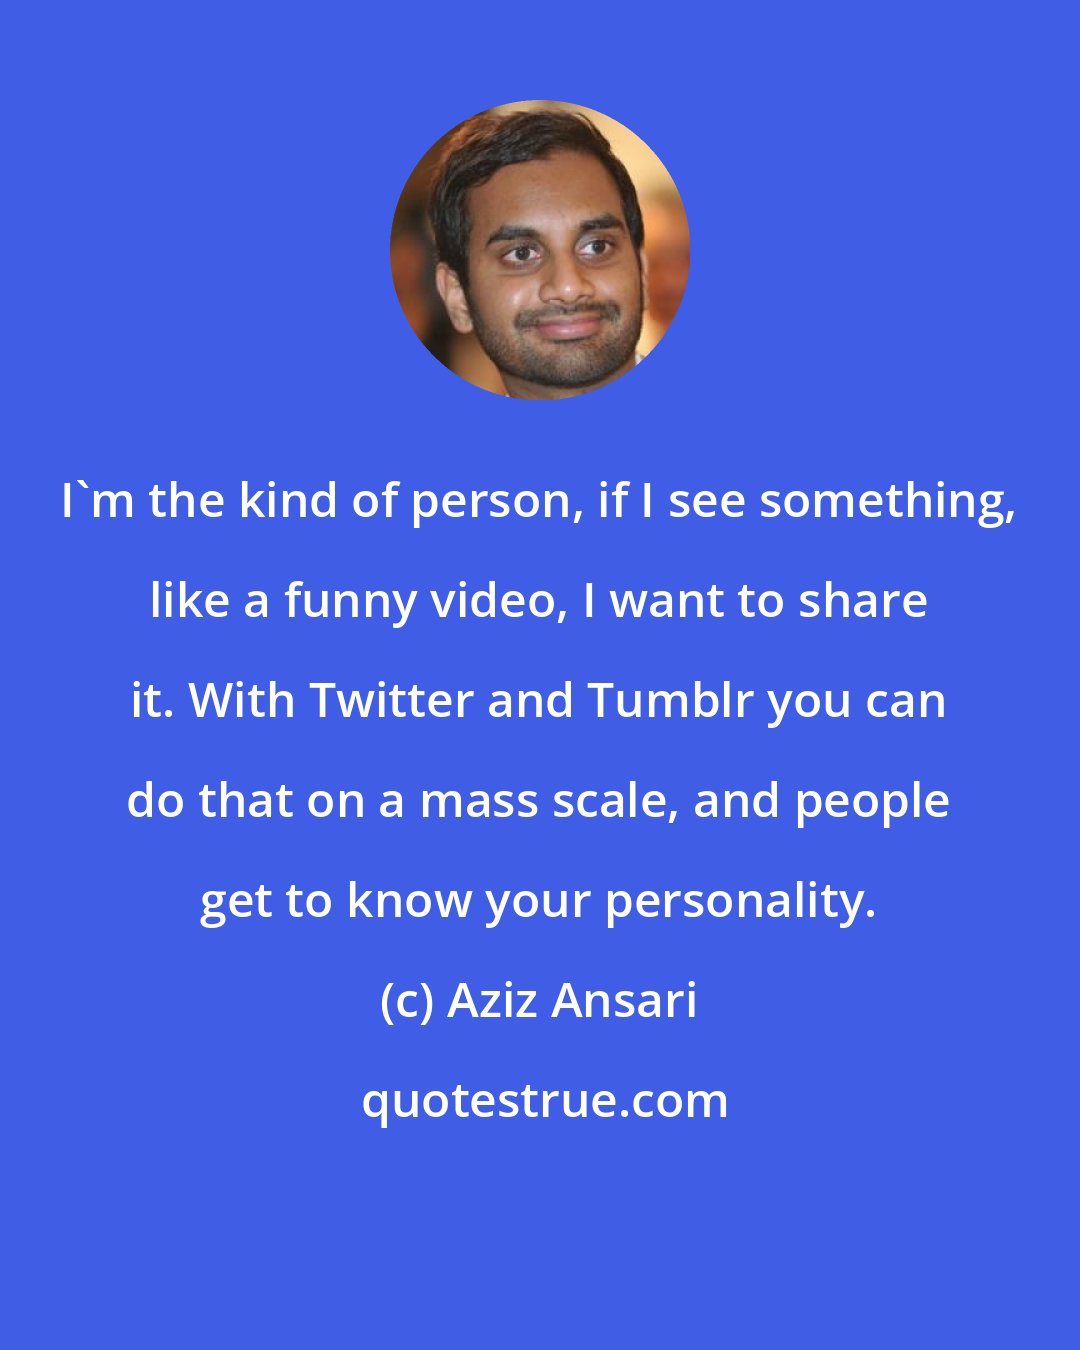 Aziz Ansari: I'm the kind of person, if I see something, like a funny video, I want to share it. With Twitter and Tumblr you can do that on a mass scale, and people get to know your personality.